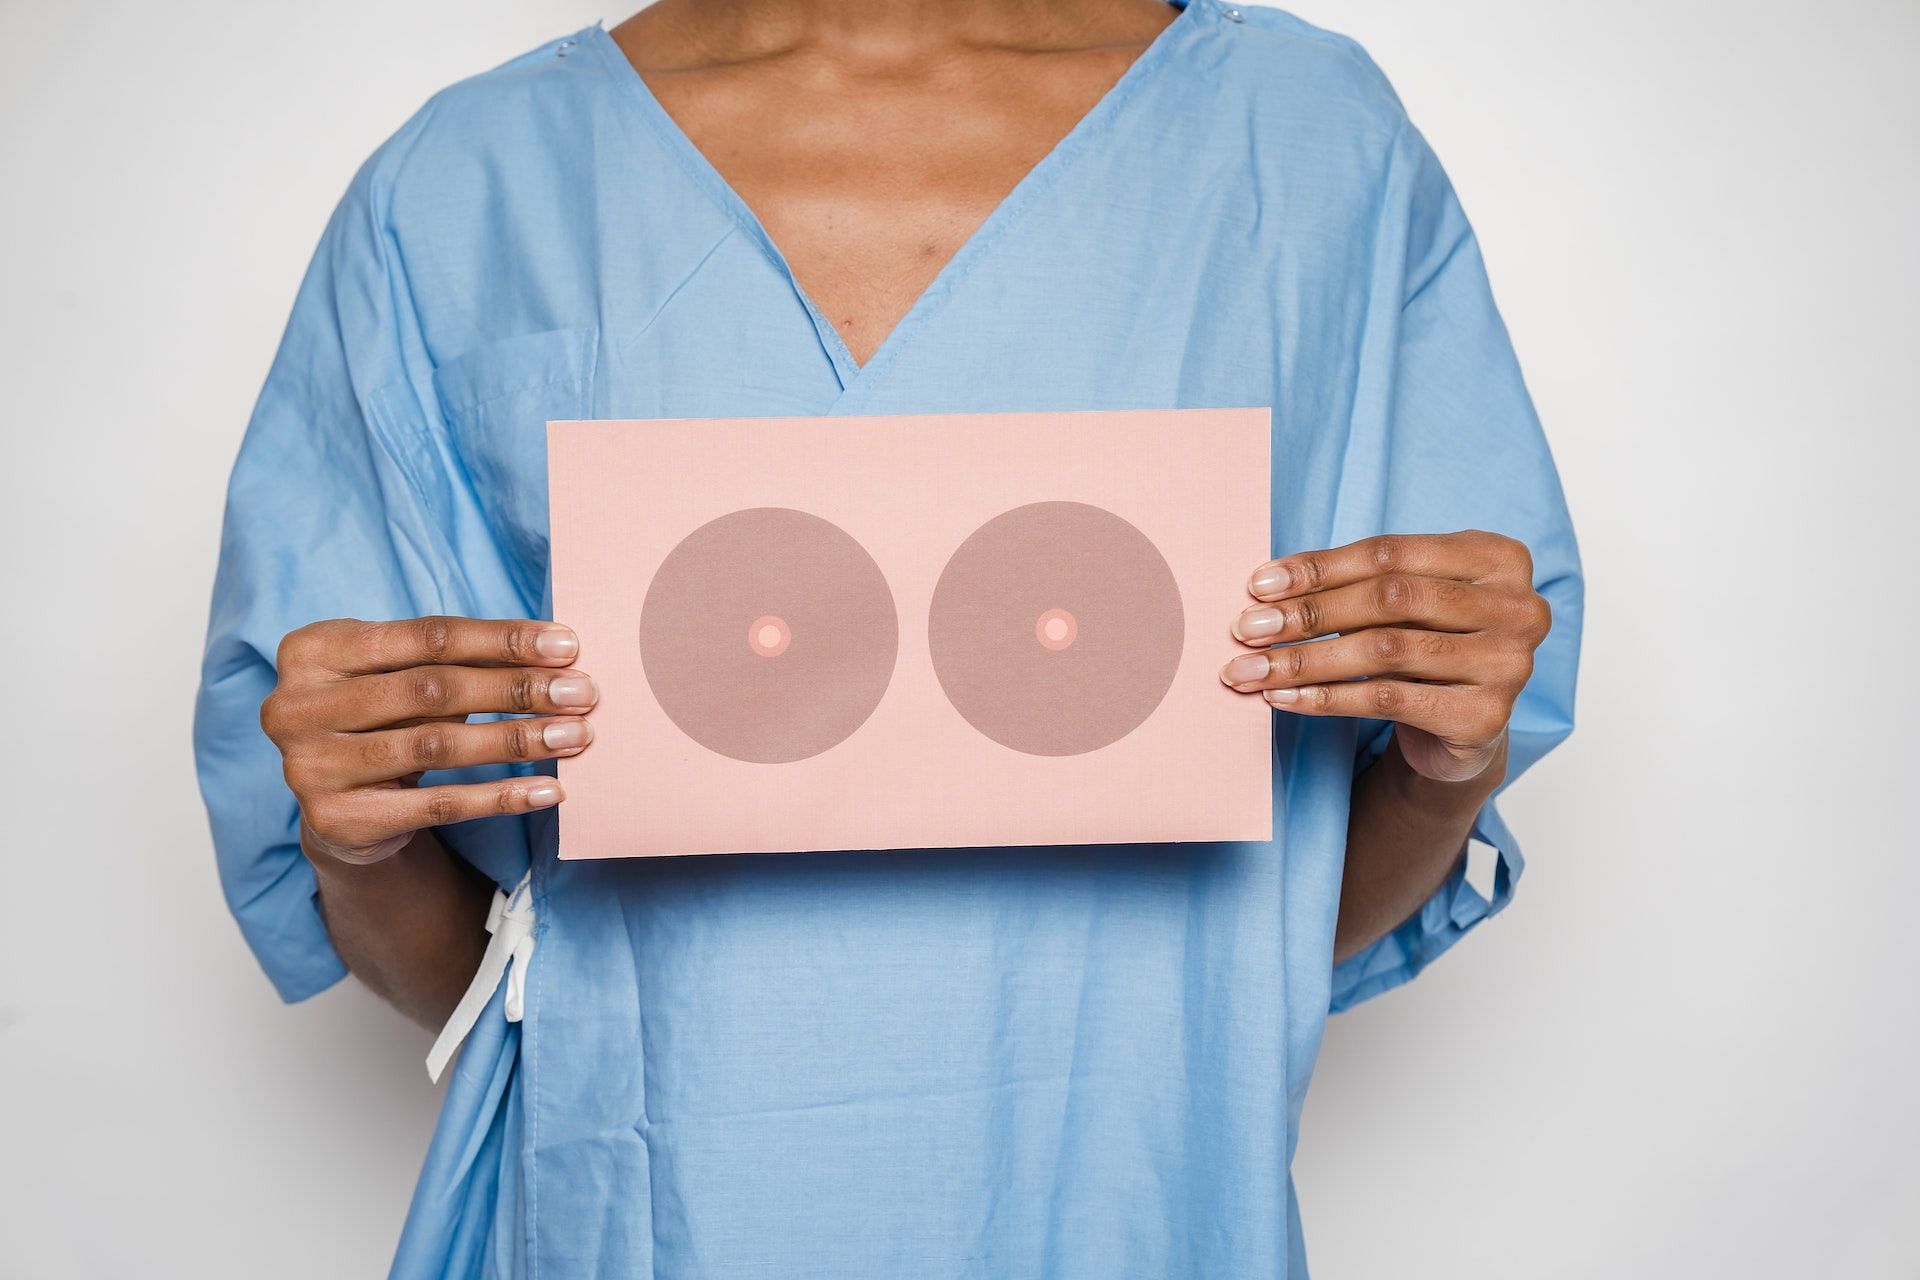 Watch out for change in the shape and size of your breasts. (Image via Pexels/Klaus Nielsen)